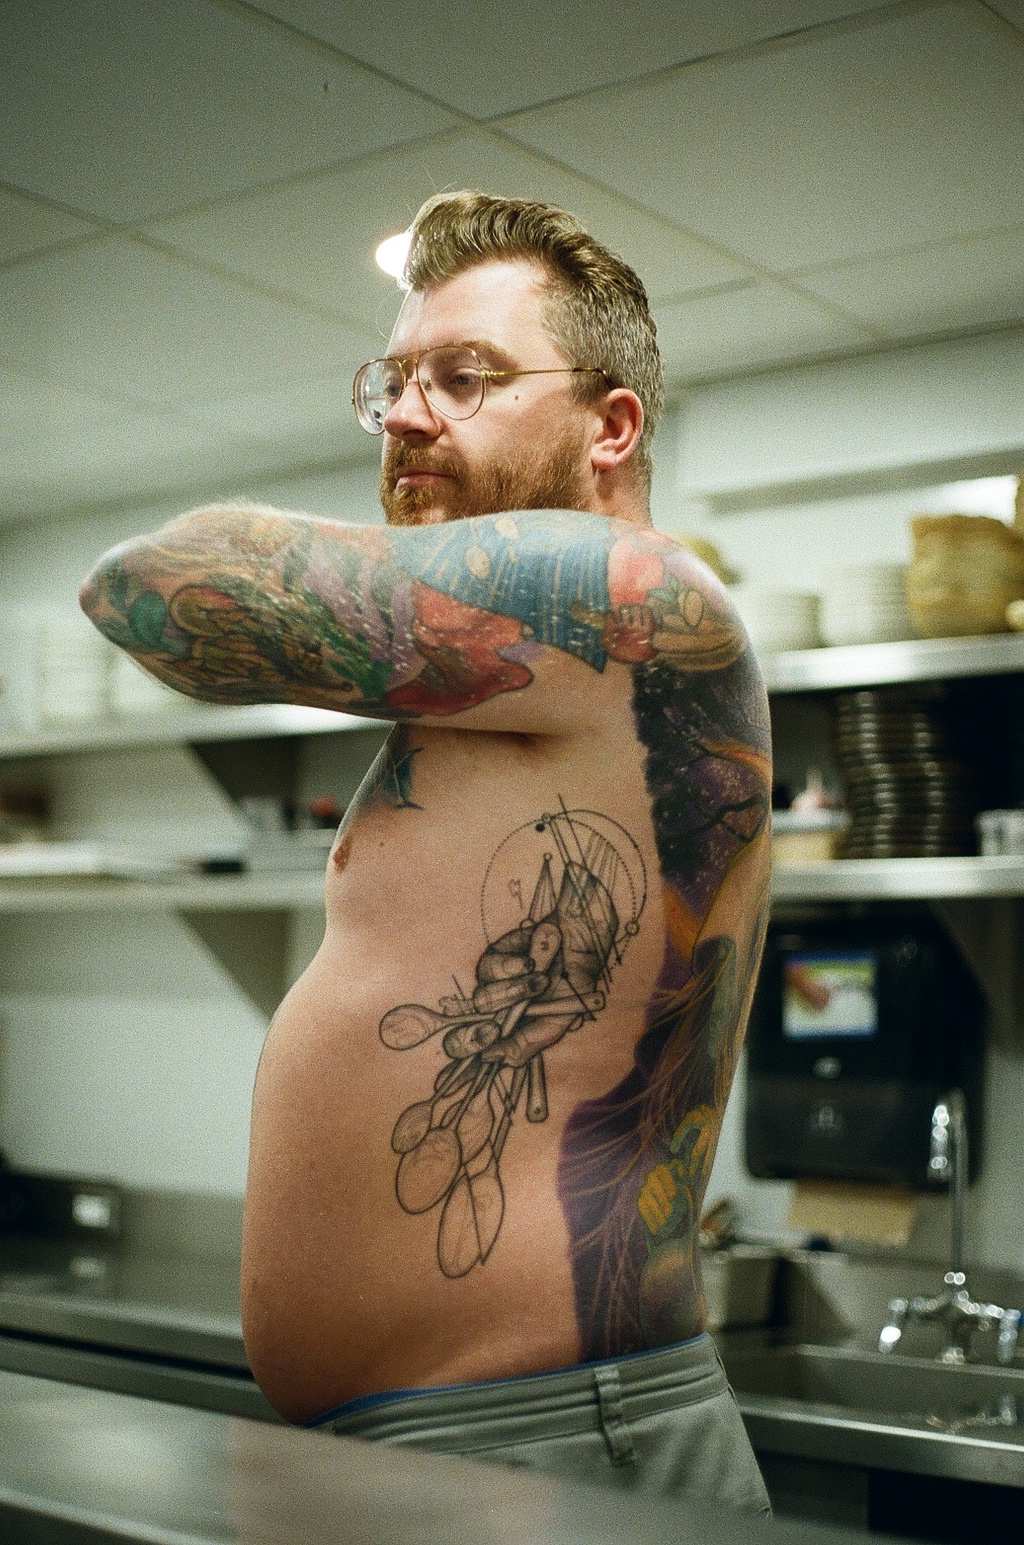 Why do chefs have so many tattoos?